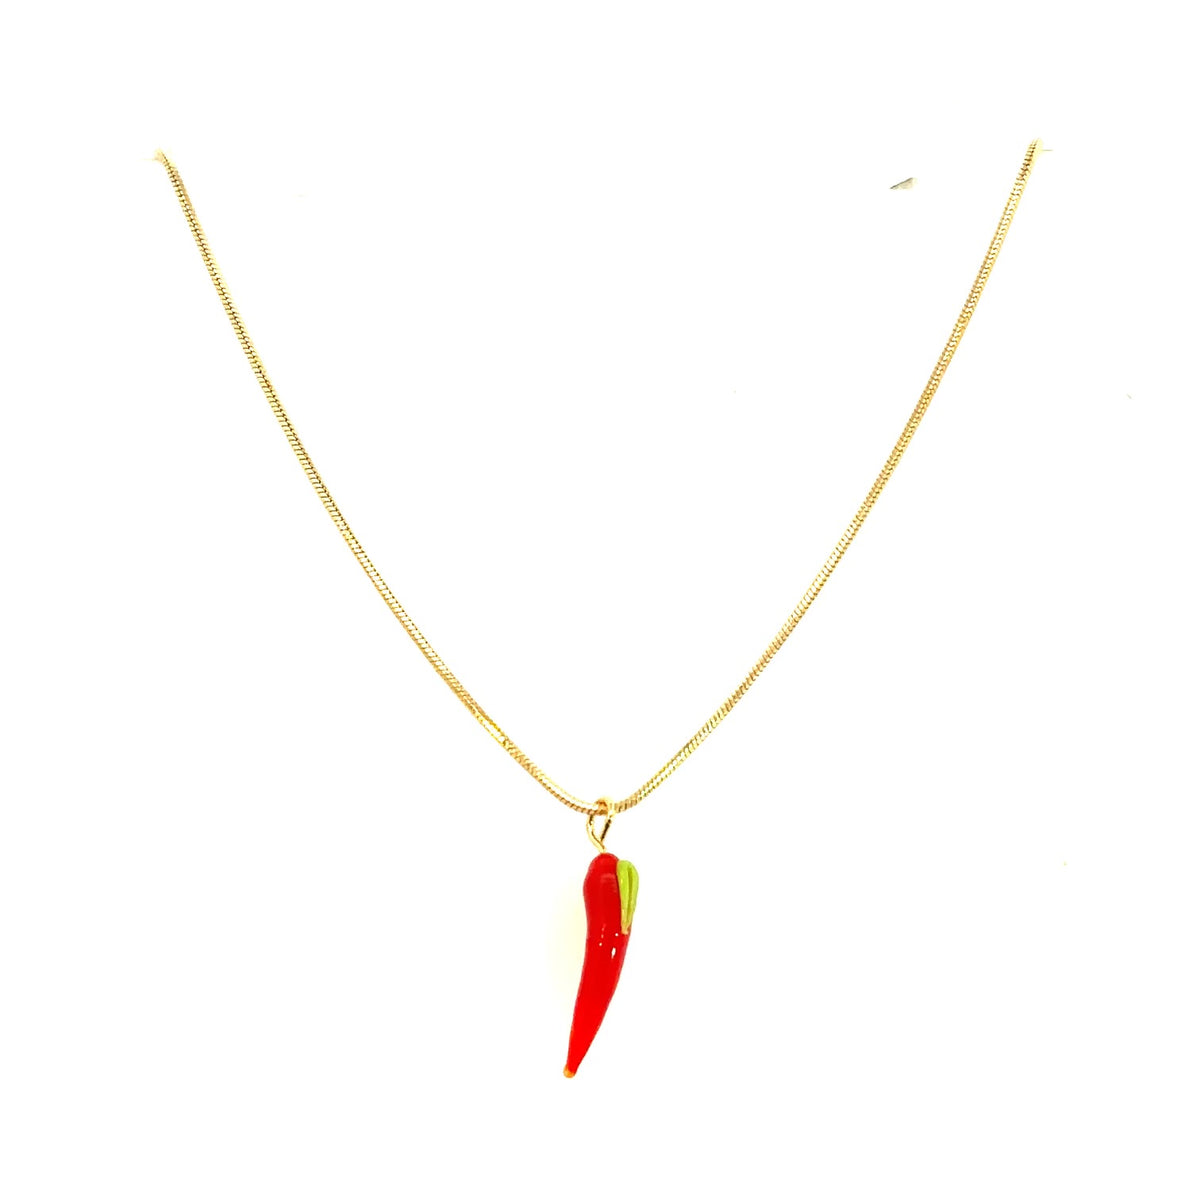 Red Chili Pepper Charm Necklace